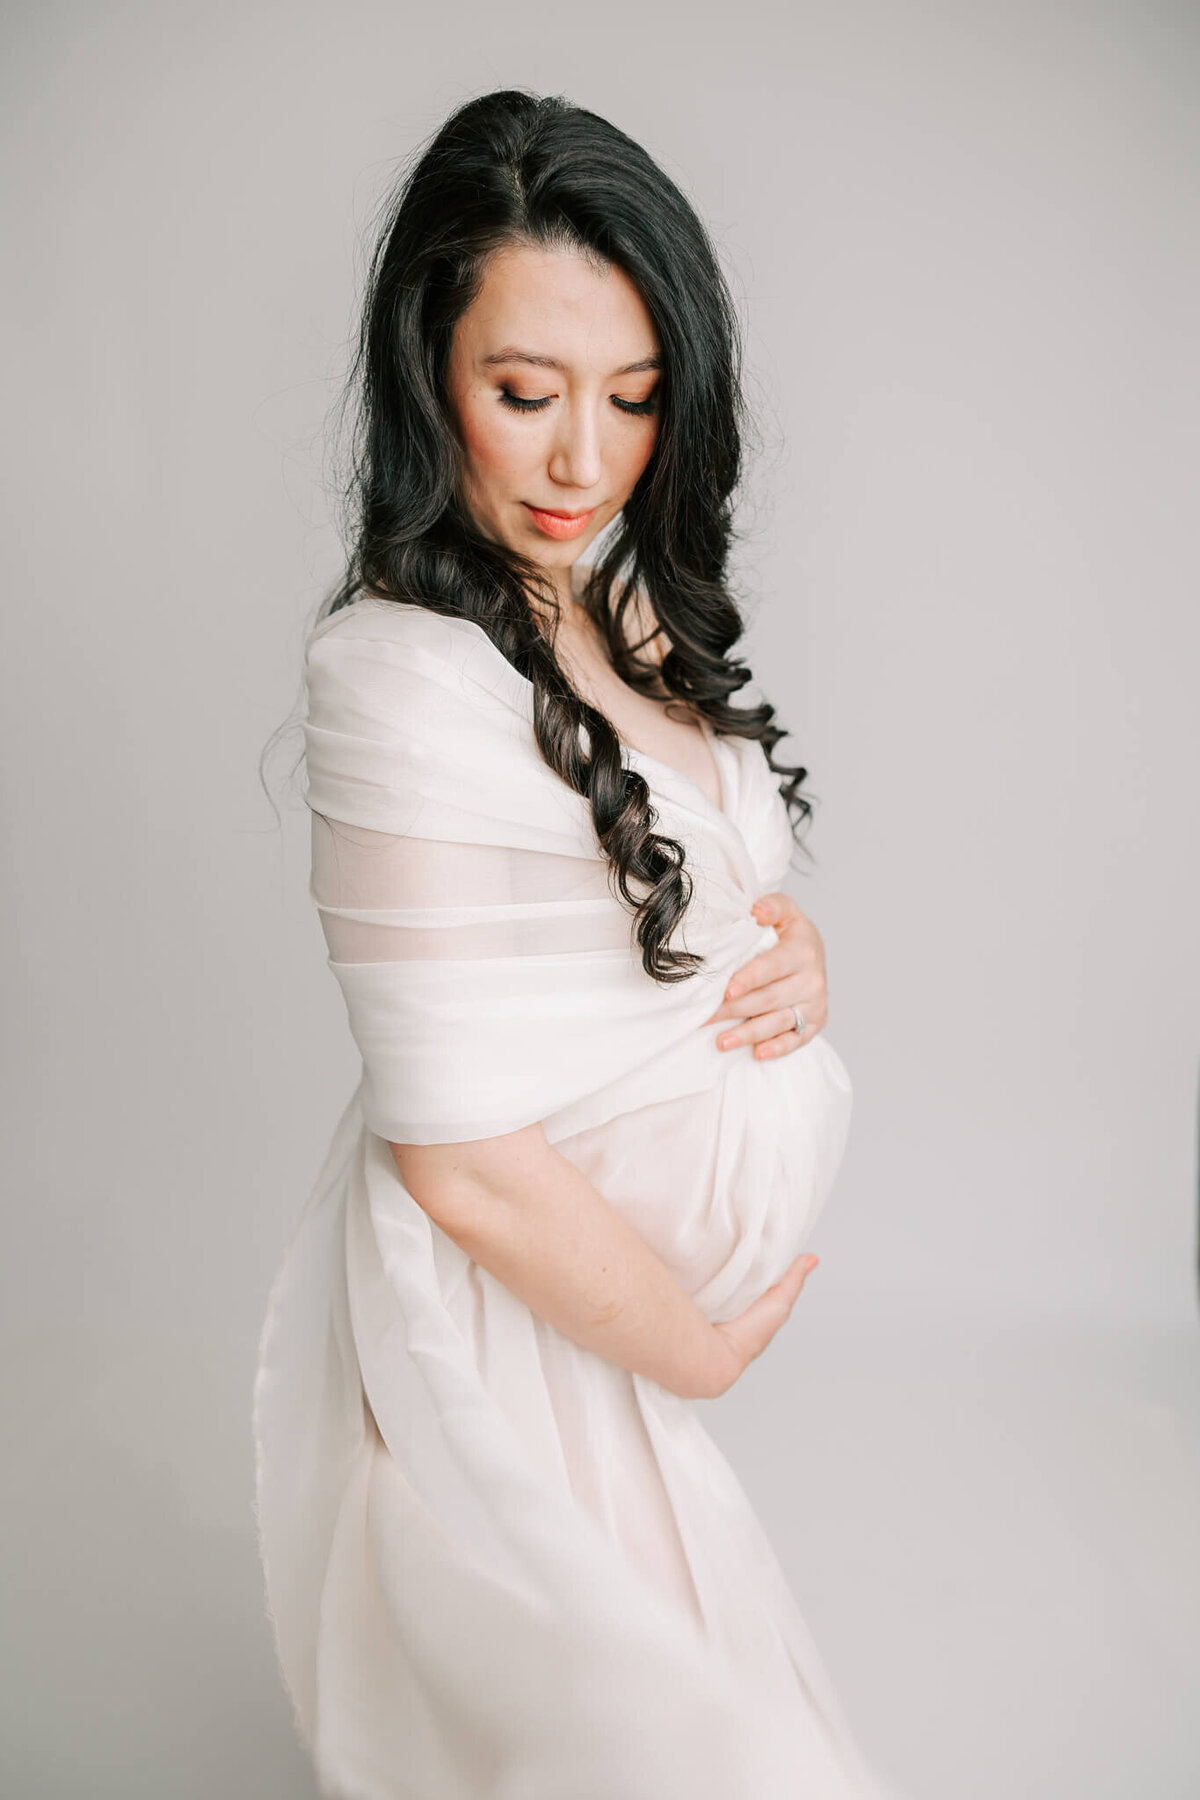 fine art maternity portrait of a woman in white silk. She had black hair and is holding her belly